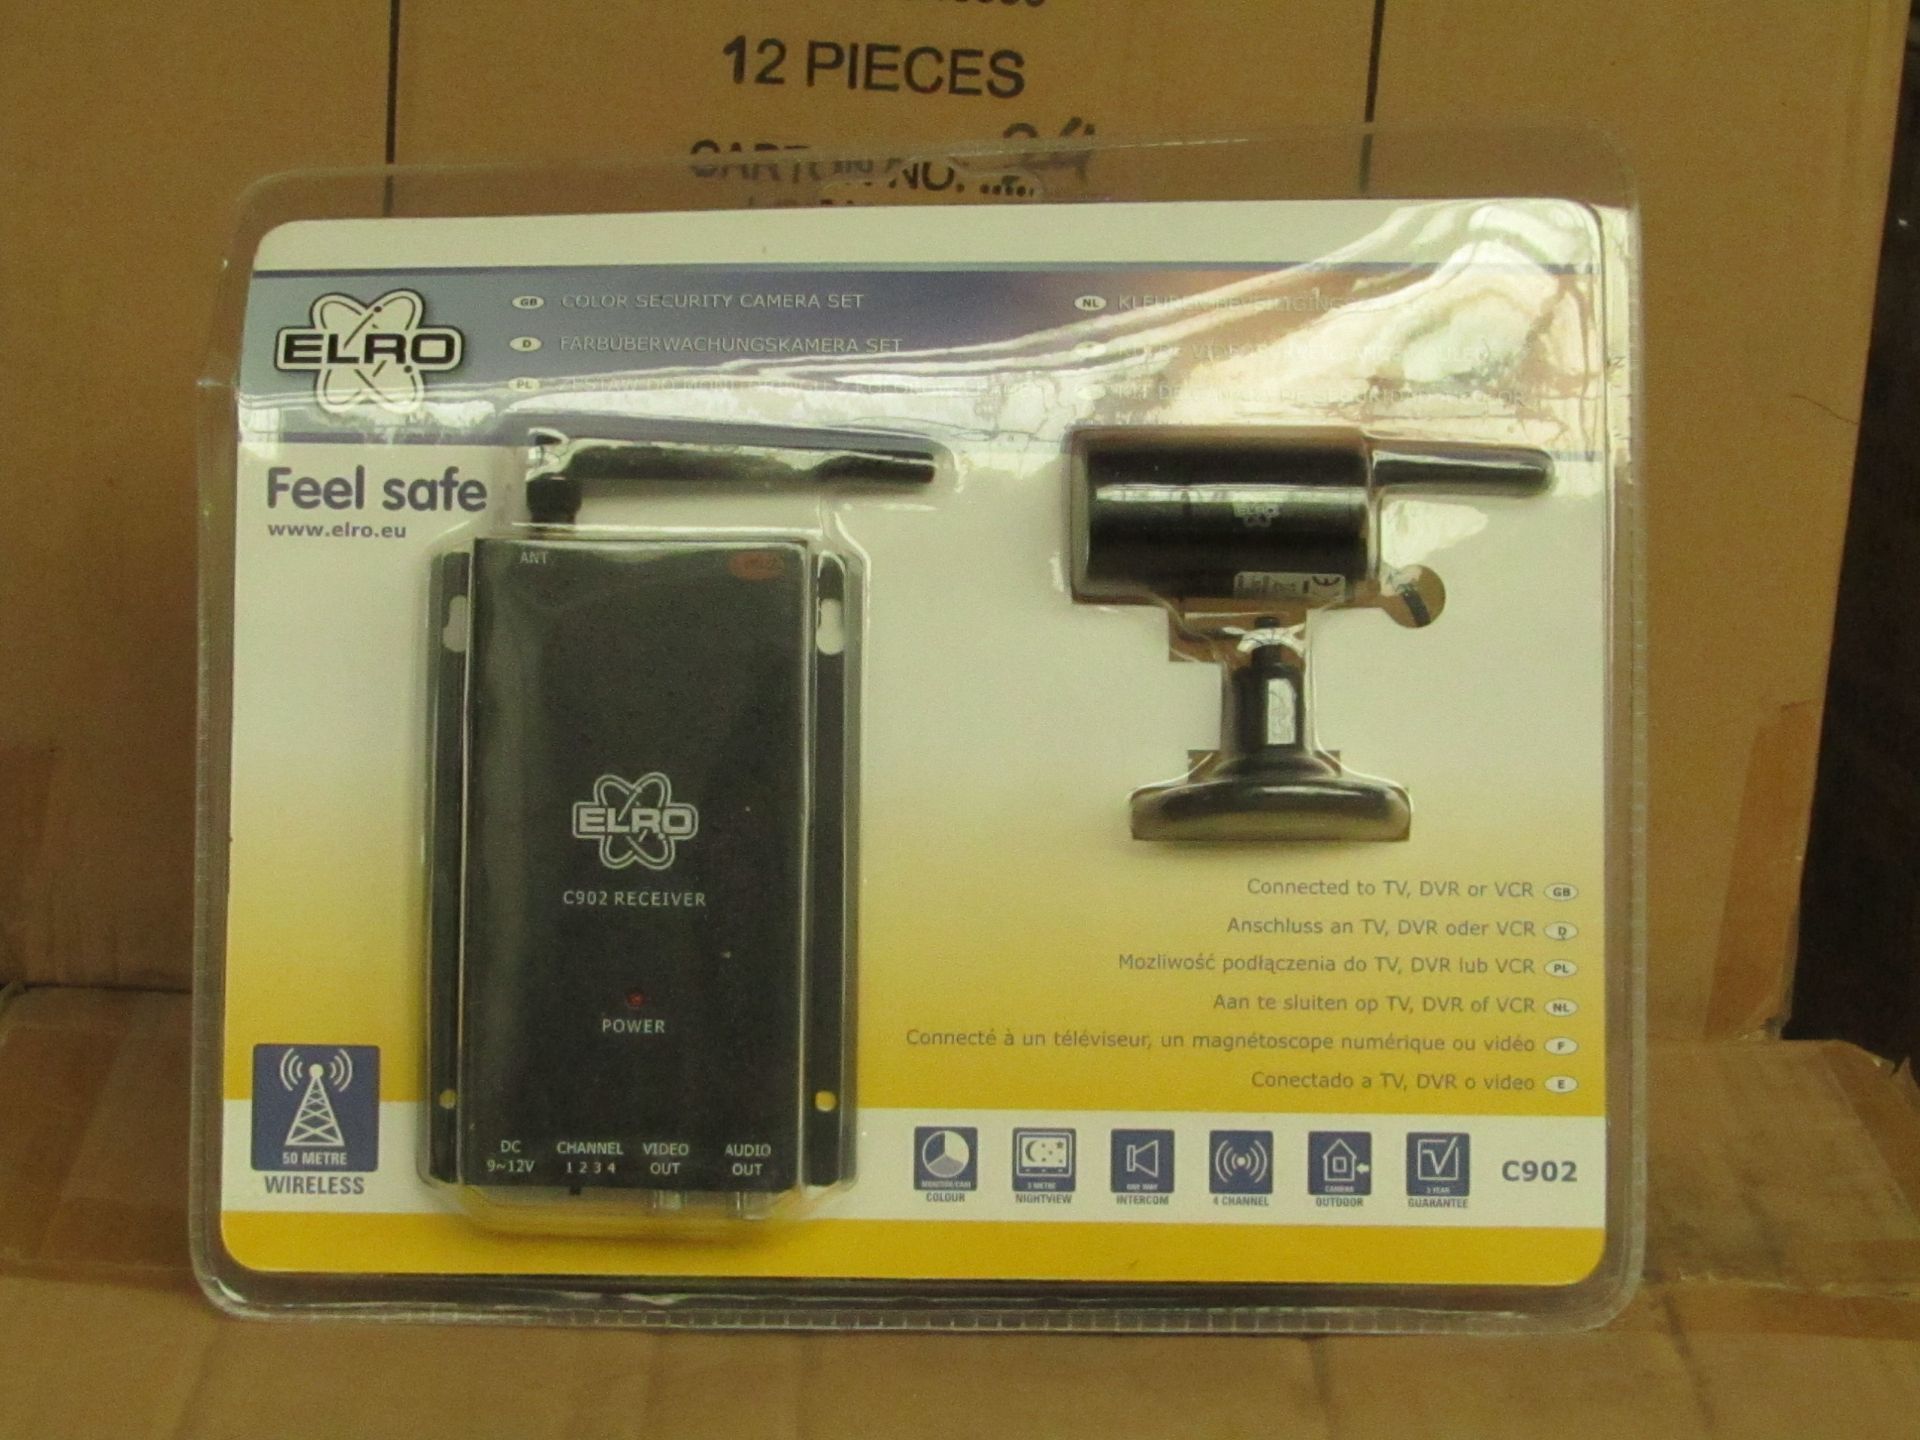 Elro Feel Safe colour security camera set, brand new and boxed.